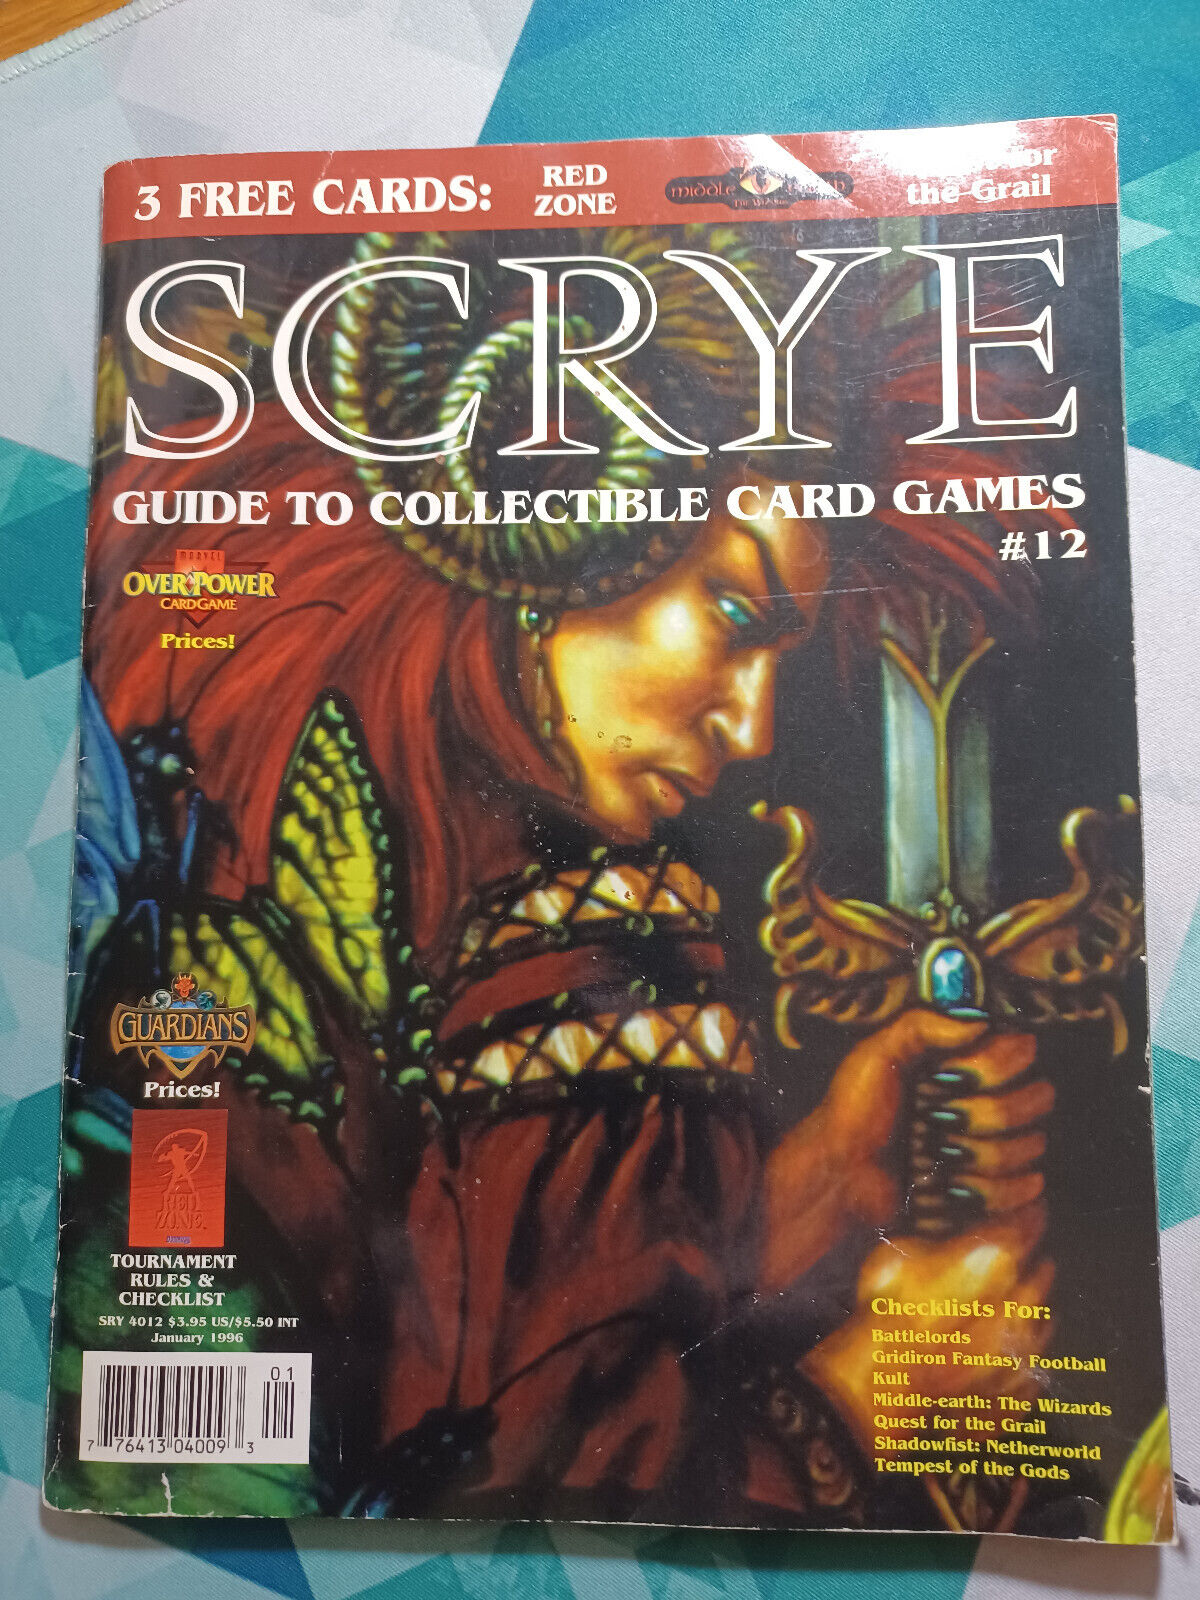 Scrye Magazine Issue Volume #12 Guide to Collectible Card Games 